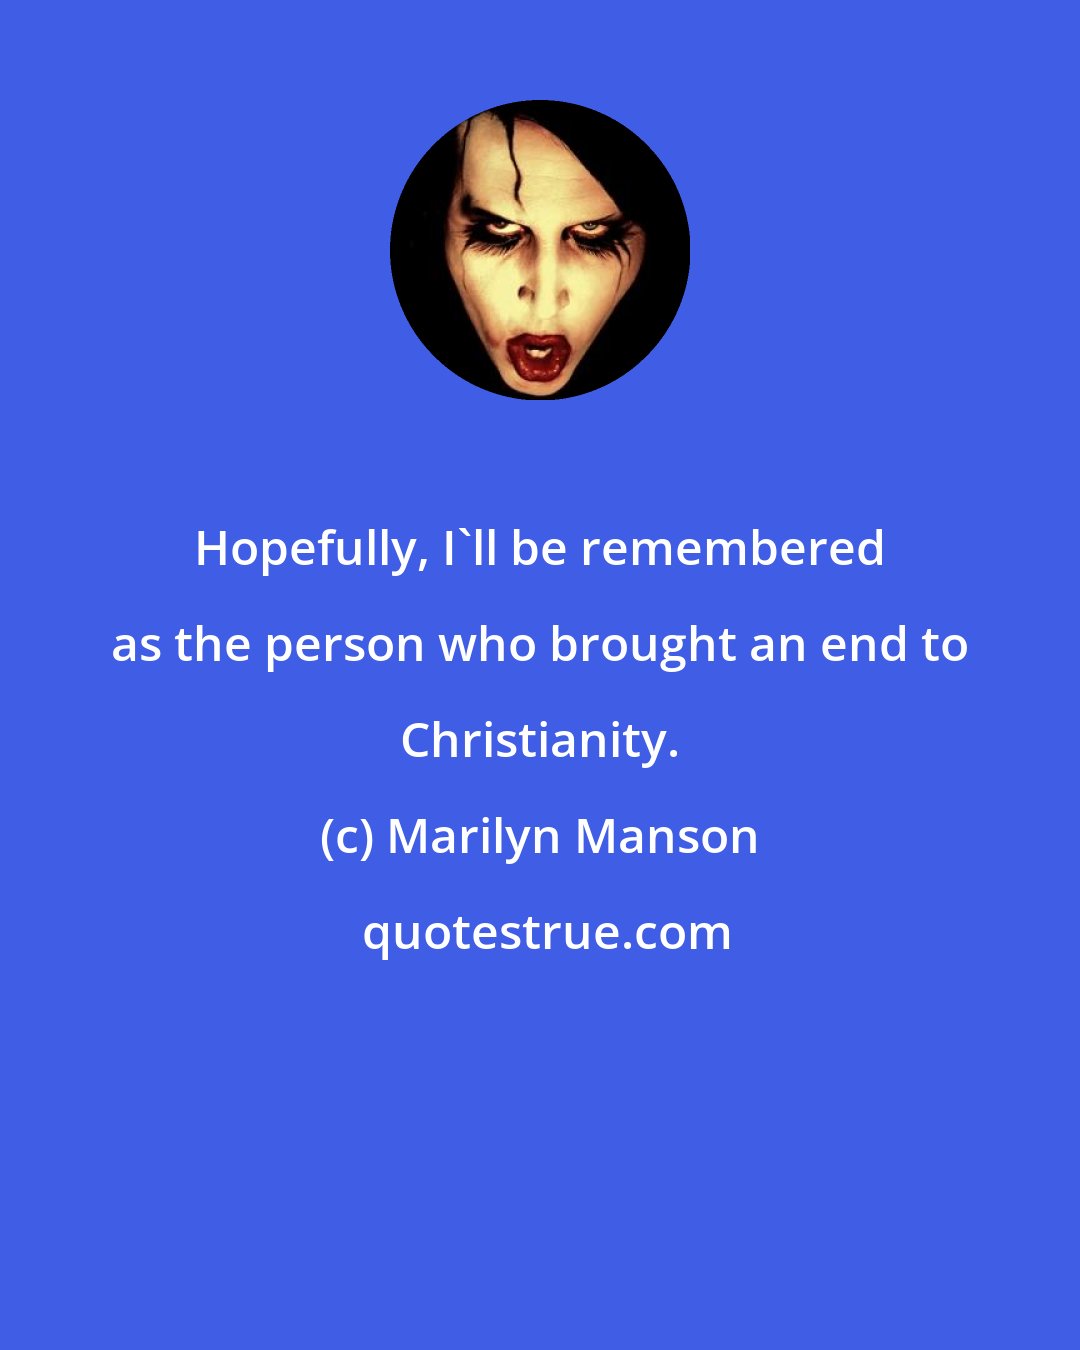 Marilyn Manson: Hopefully, I'll be remembered as the person who brought an end to Christianity.